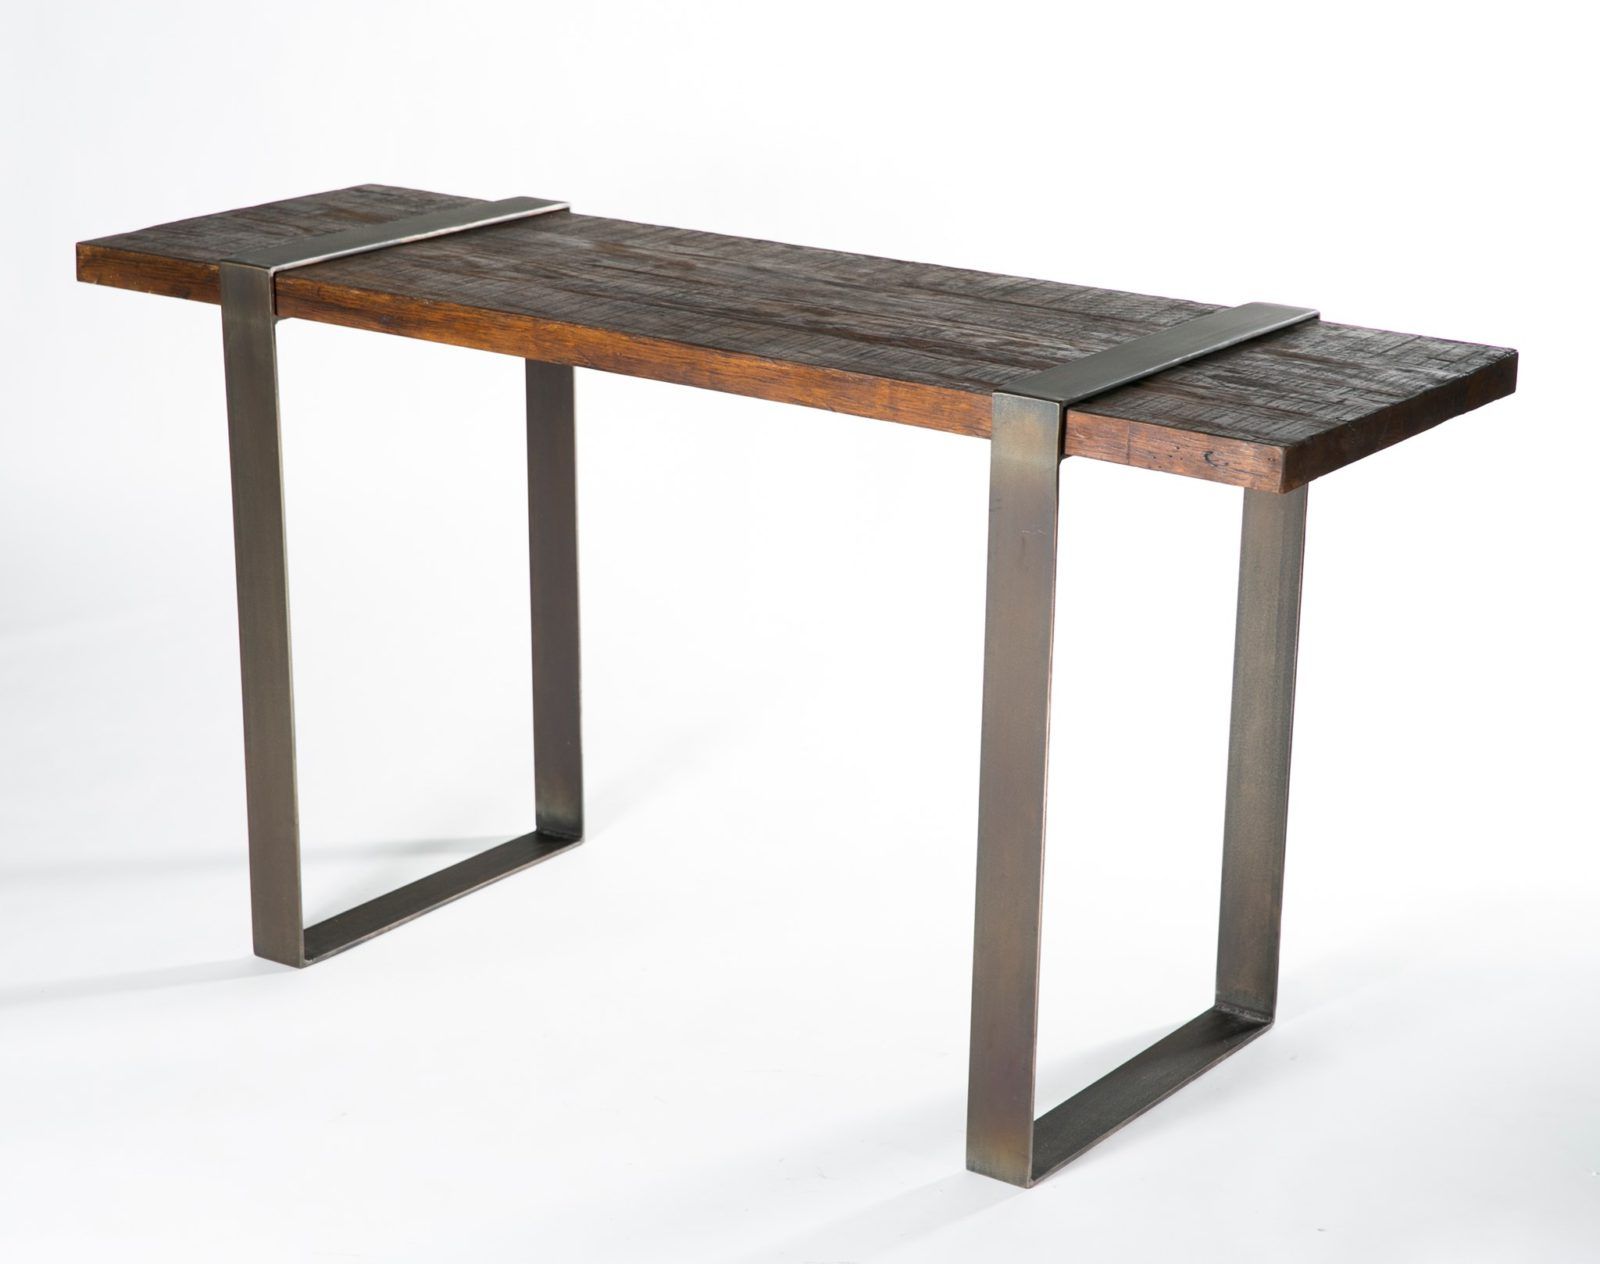 Oak Wood And Metal Legs Console Tables In Most Popular Jackson Console Table With Steel Strap Legs And Reclaimed (View 2 of 10)